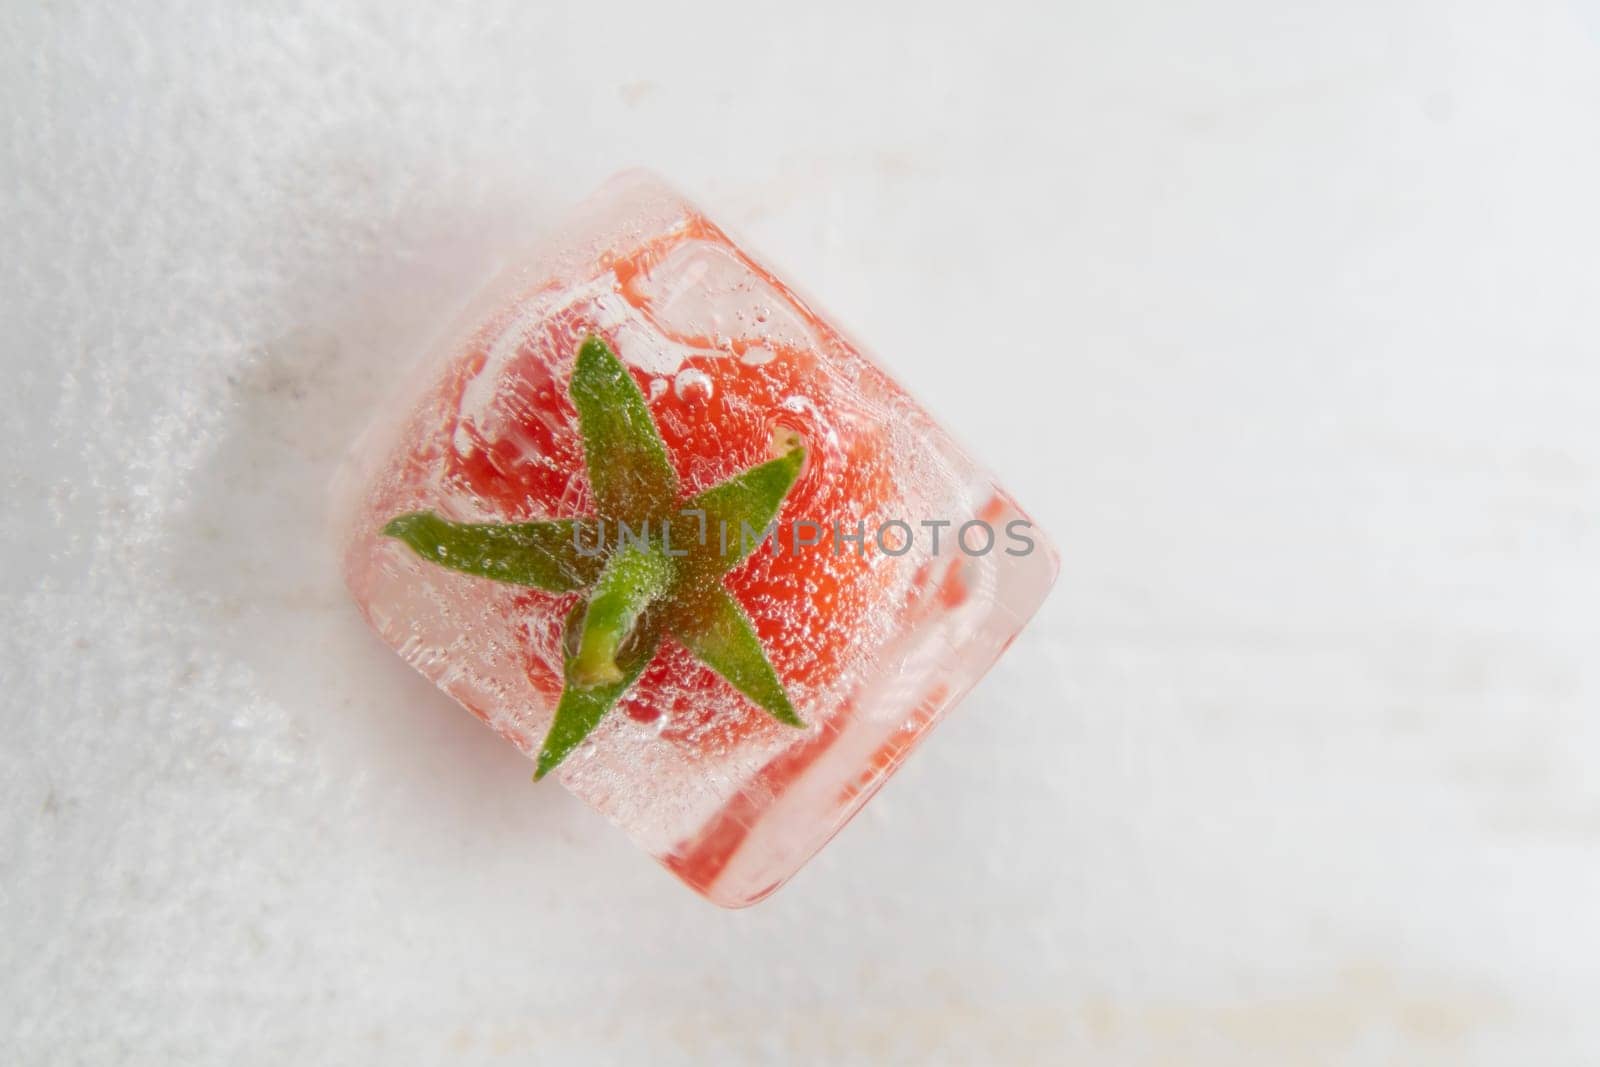 Photographic documentation of some small tomatoes inside an ice cube 